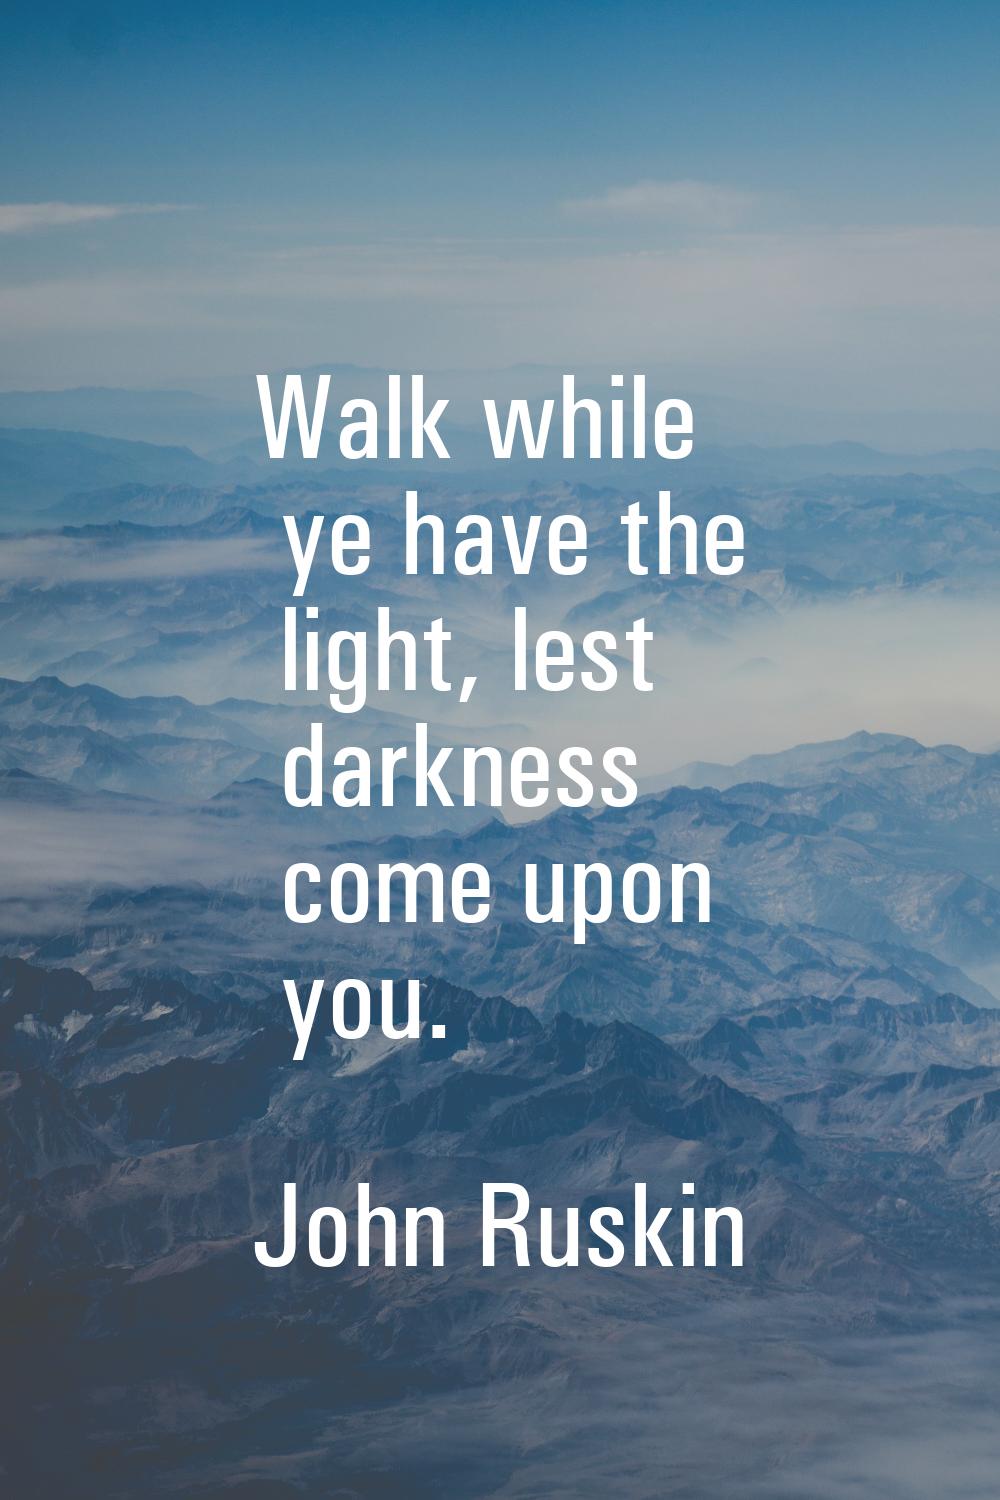 Walk while ye have the light, lest darkness come upon you.